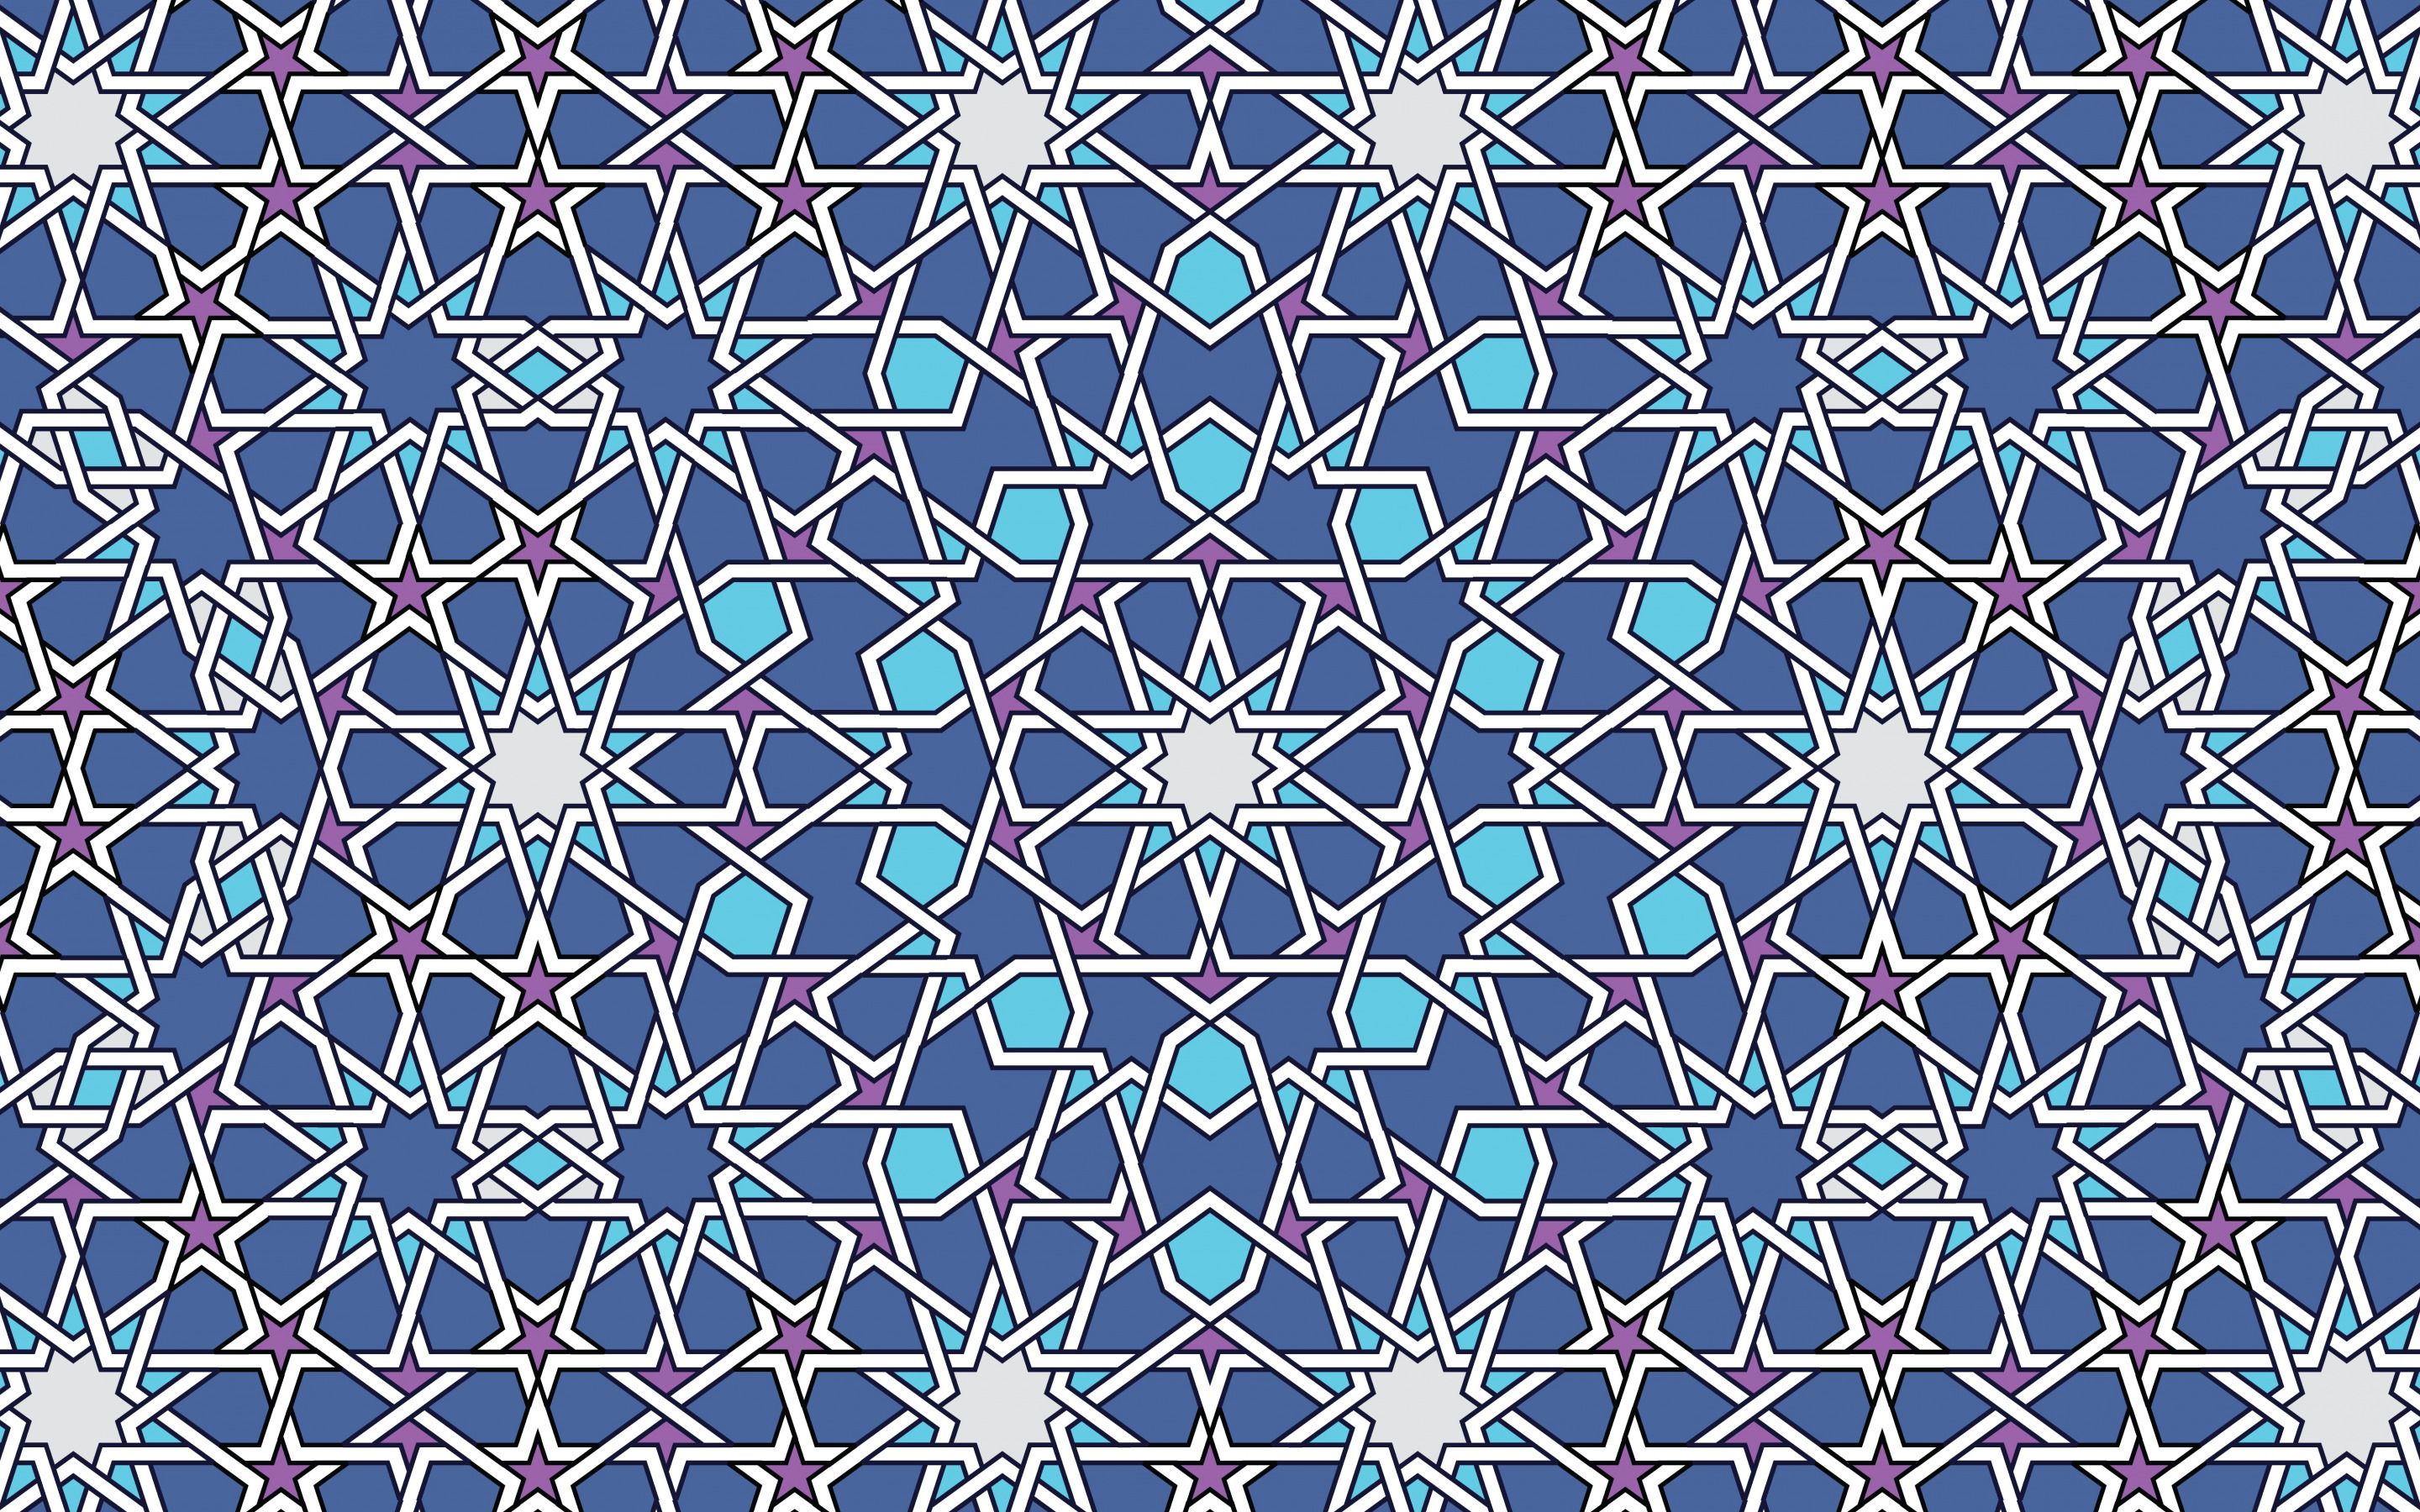 Download wallpaper islamic ornament texture, texture with stars, blue ornament texture, islamic texture, blue geometric background, islamic pattern for desktop with resolution 2880x1800. High Quality HD picture wallpaper